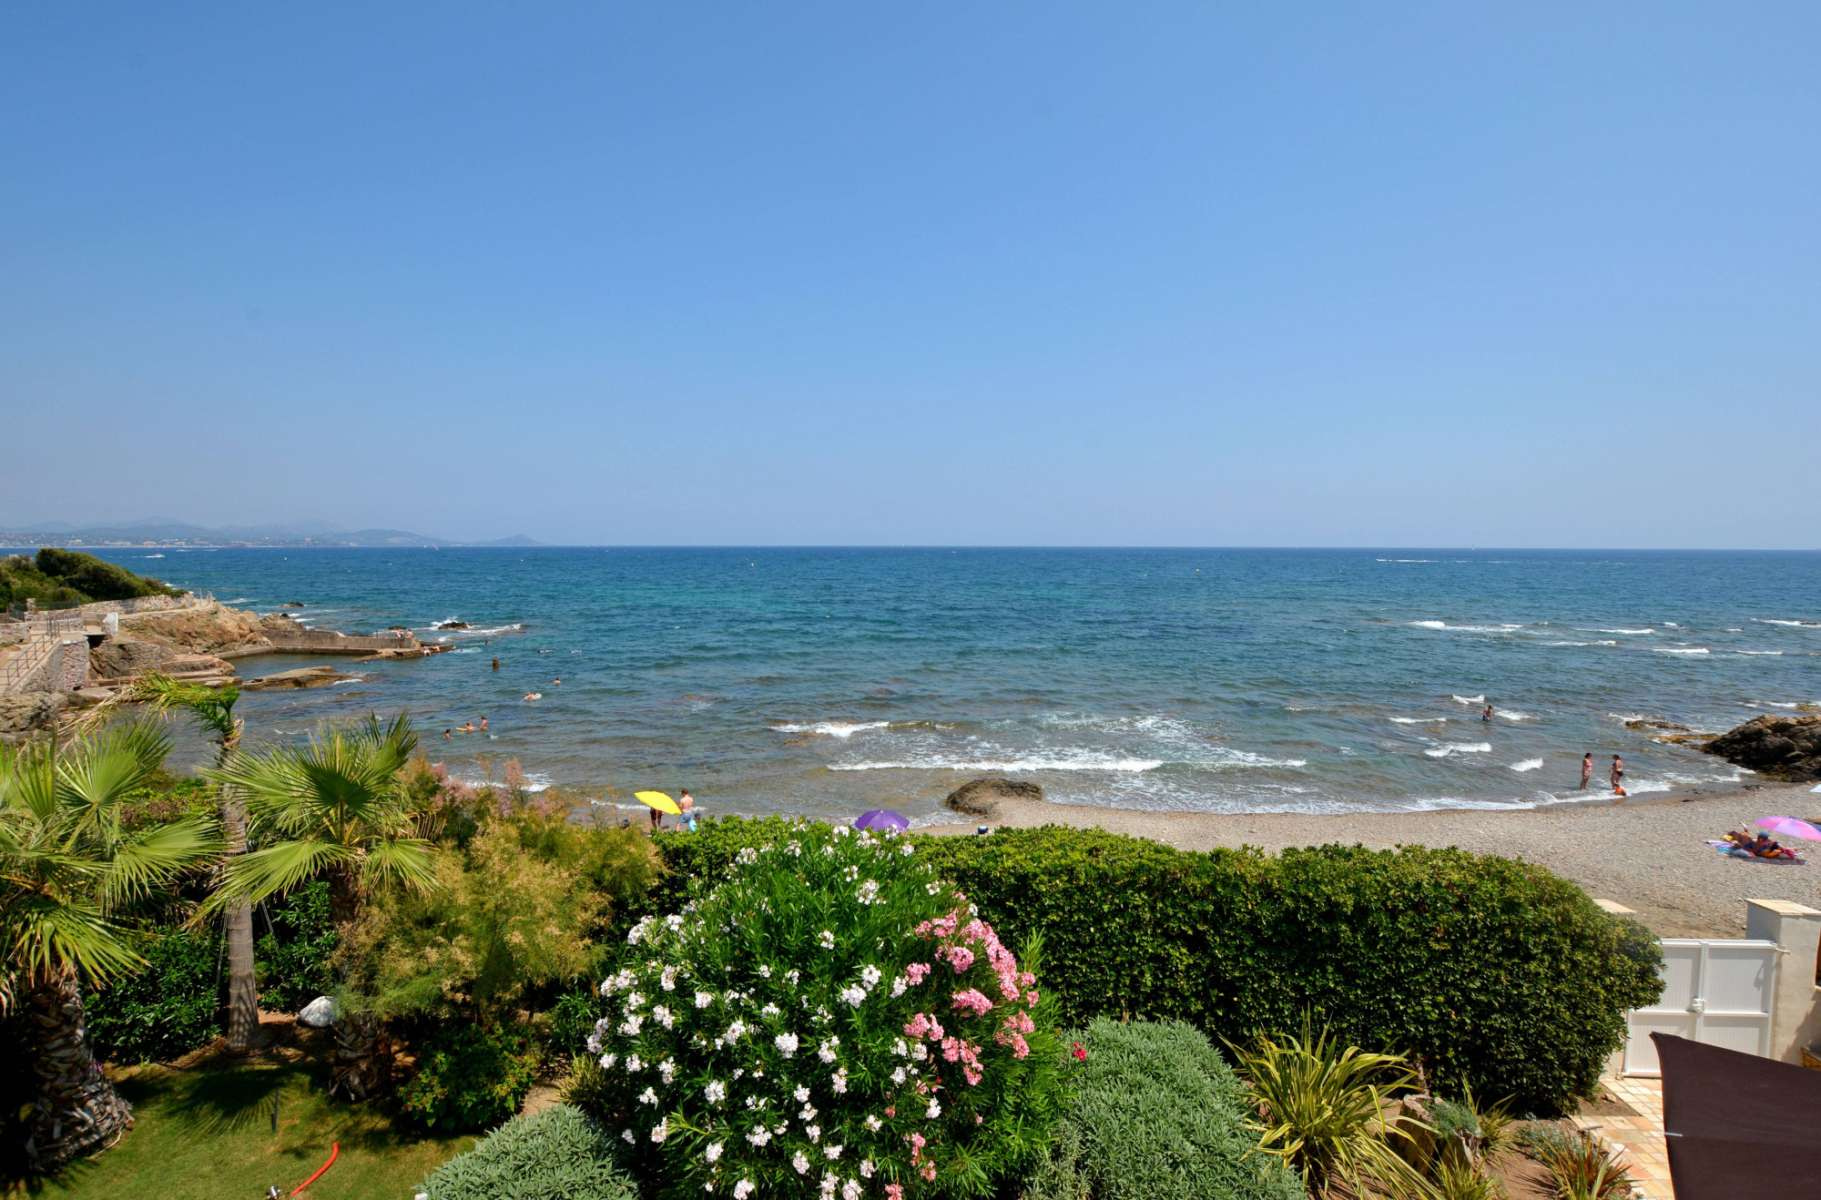 Fréjus Beachfront Villa with Private Beach Access and Rental Potential